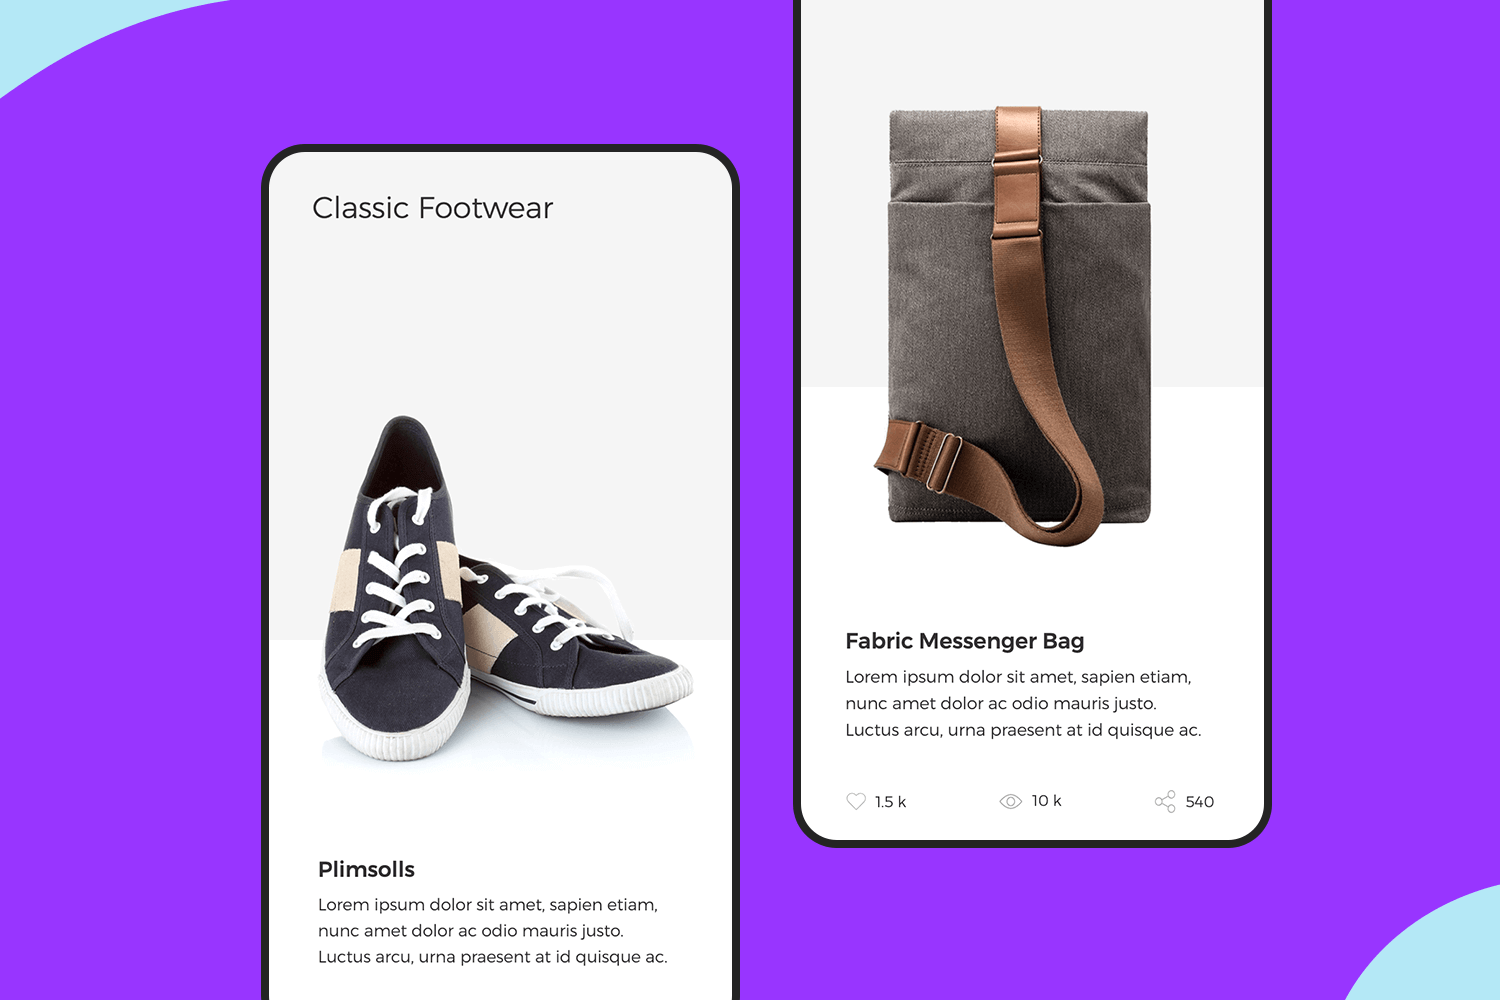 Product transitions app template showcasing classic footwear and a fabric messenger bag